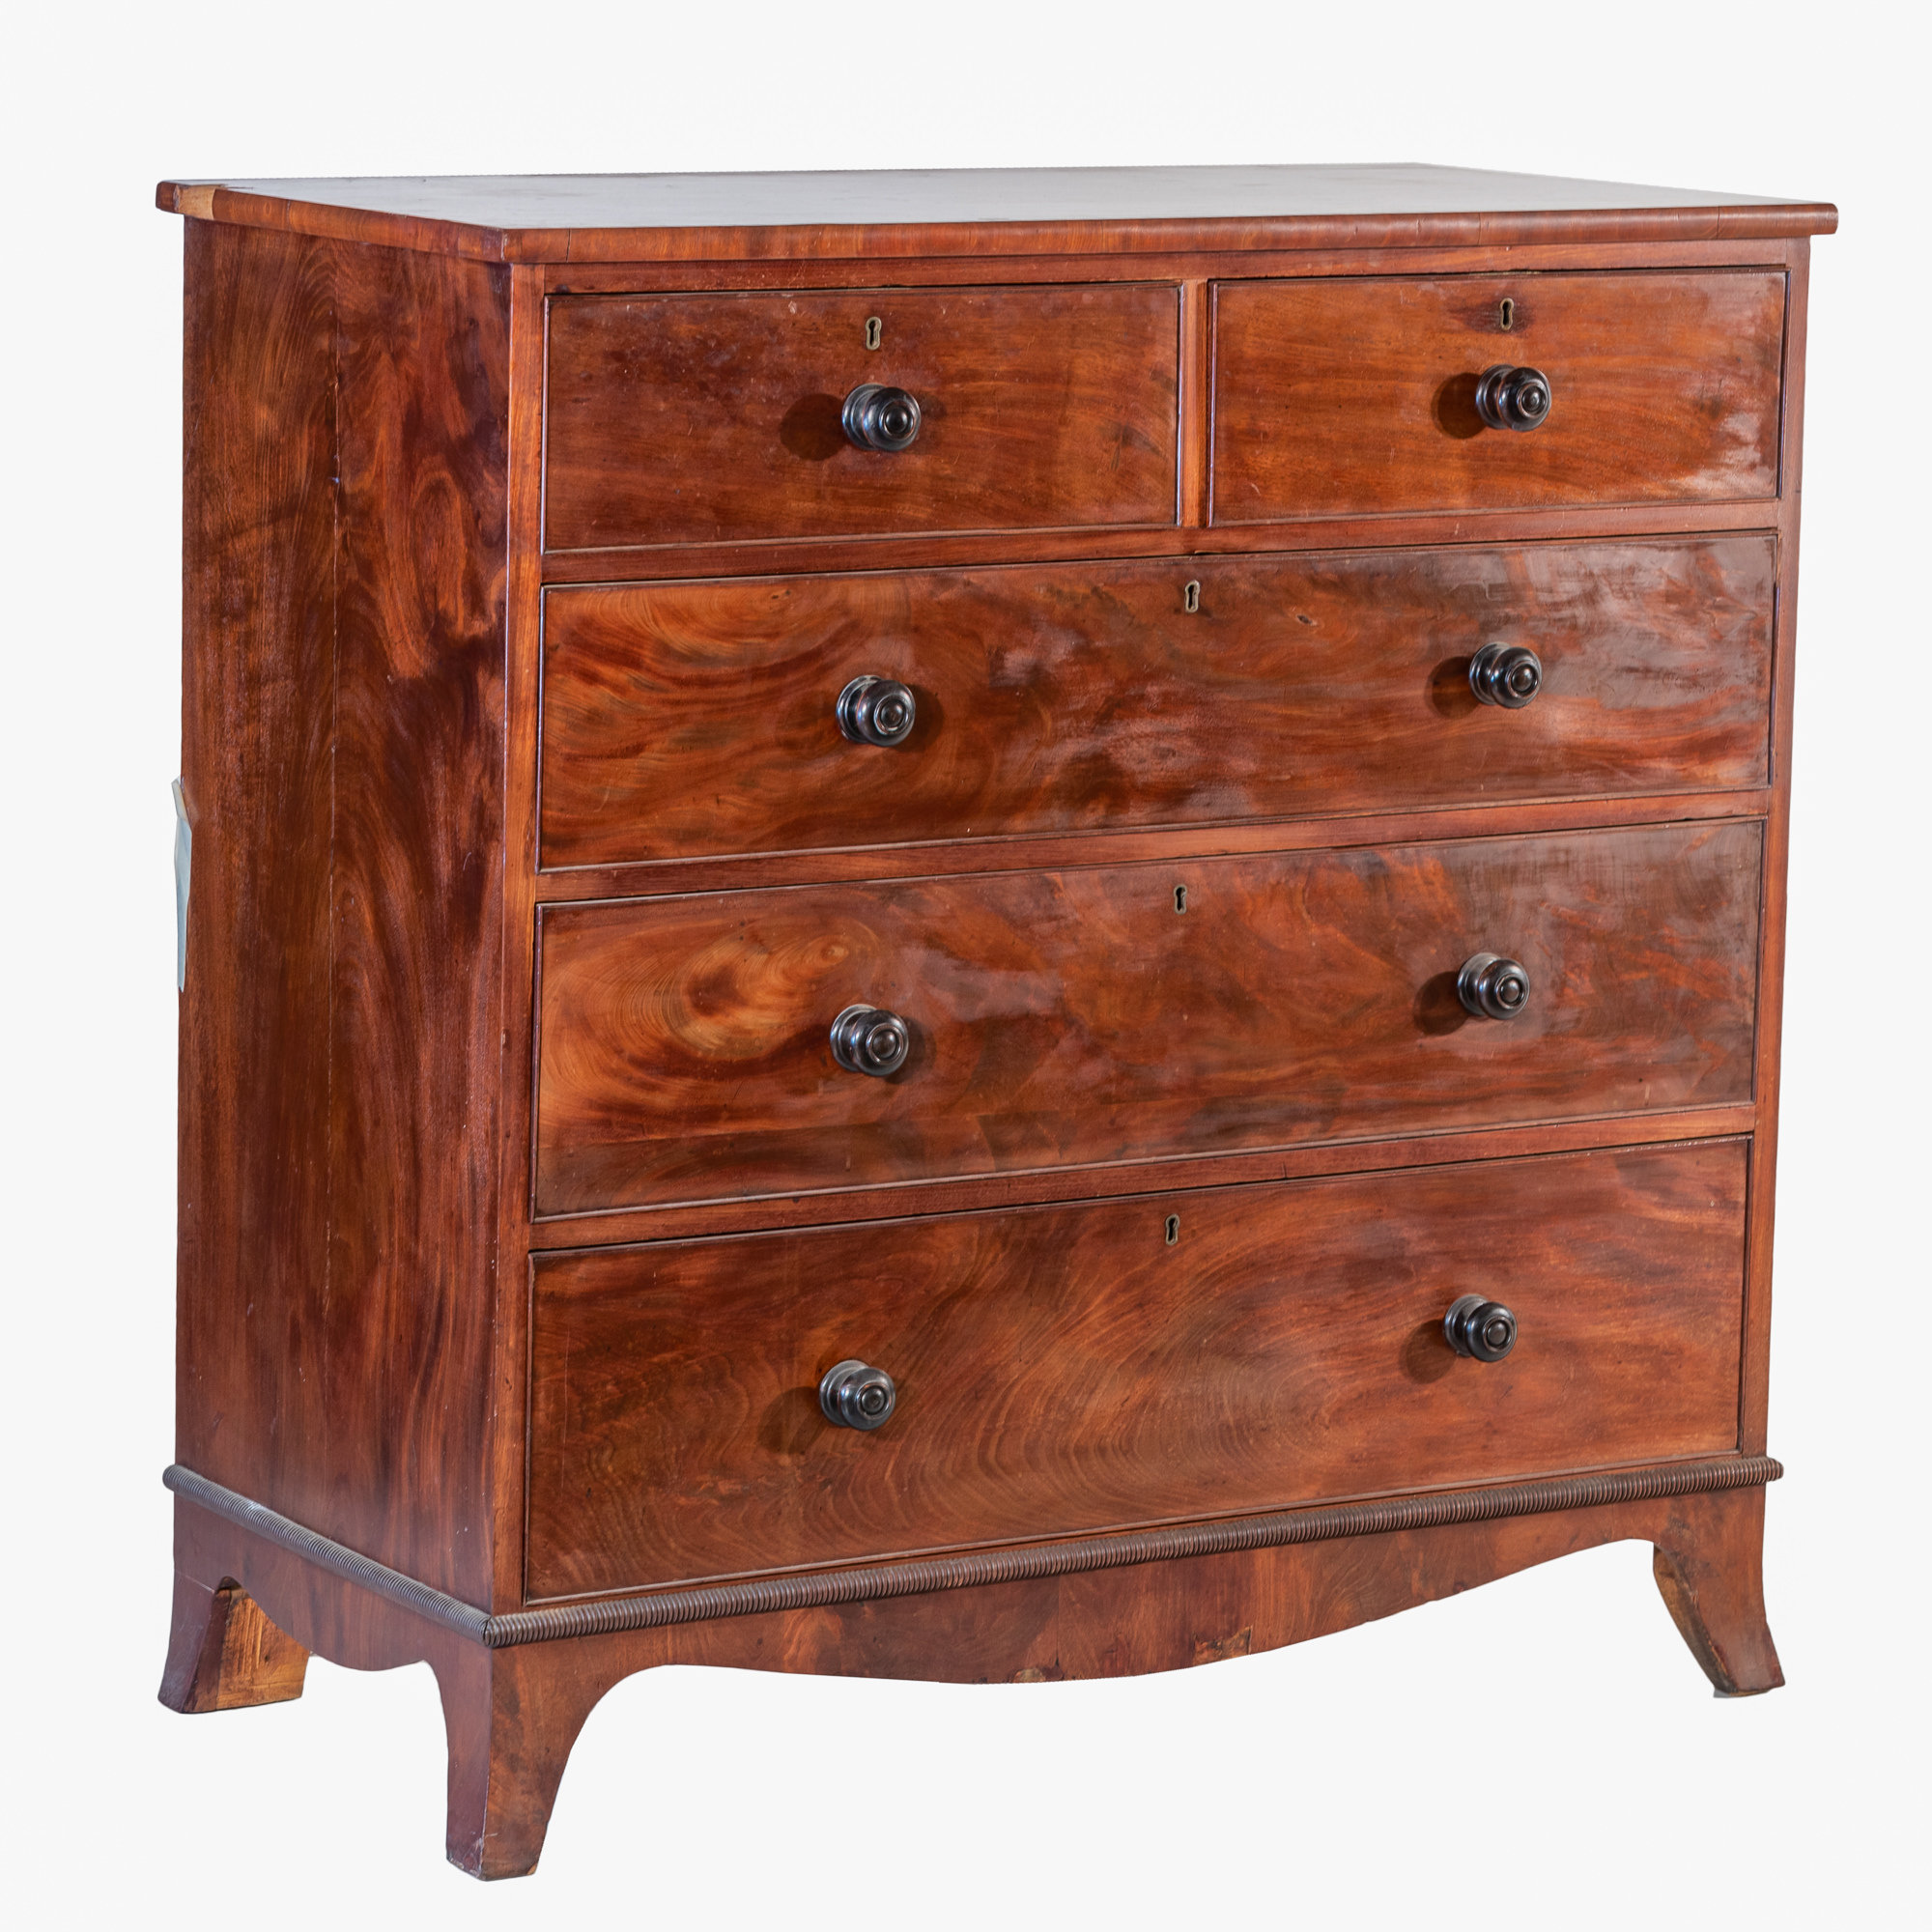 'William IV Mahogany Chest of Drawers with Two Short Drawers Over Three Long Drawers Circa 1835'